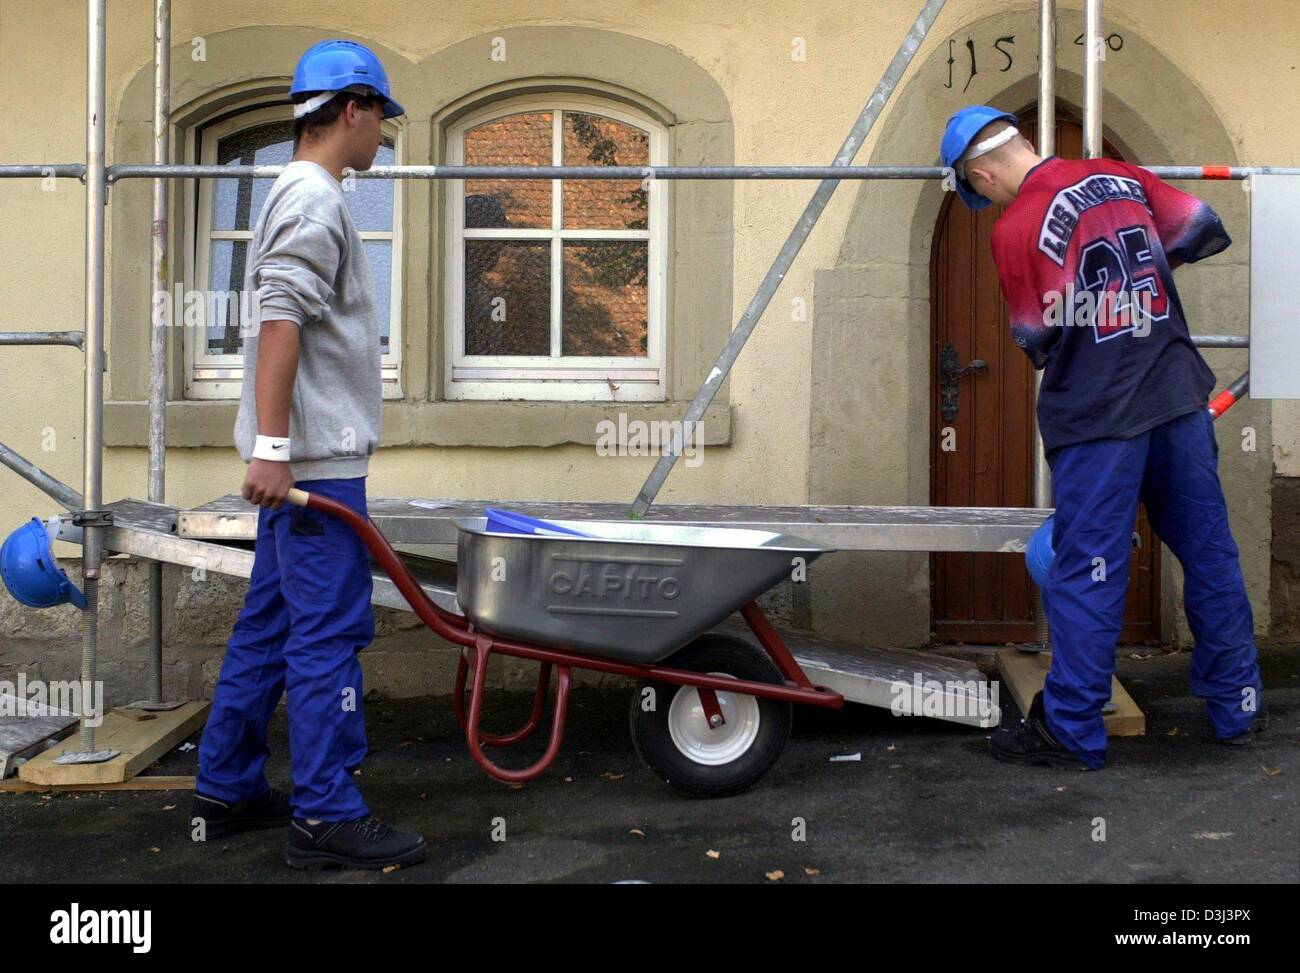 (dpa) - Two juvenile detainees participate in the renovation of the Frauental monastery as part of the rehabilitation project 'Projekt Chance' in Creglingen, Germany, 22 September 2003. The Christliche Jugendorfwerk Deutschland e. V. (CJD), a church related association concerned with the problems, support and rehabilitation of youths, initiated 'Projekt Chance' as a German pilot pr Stock Photo